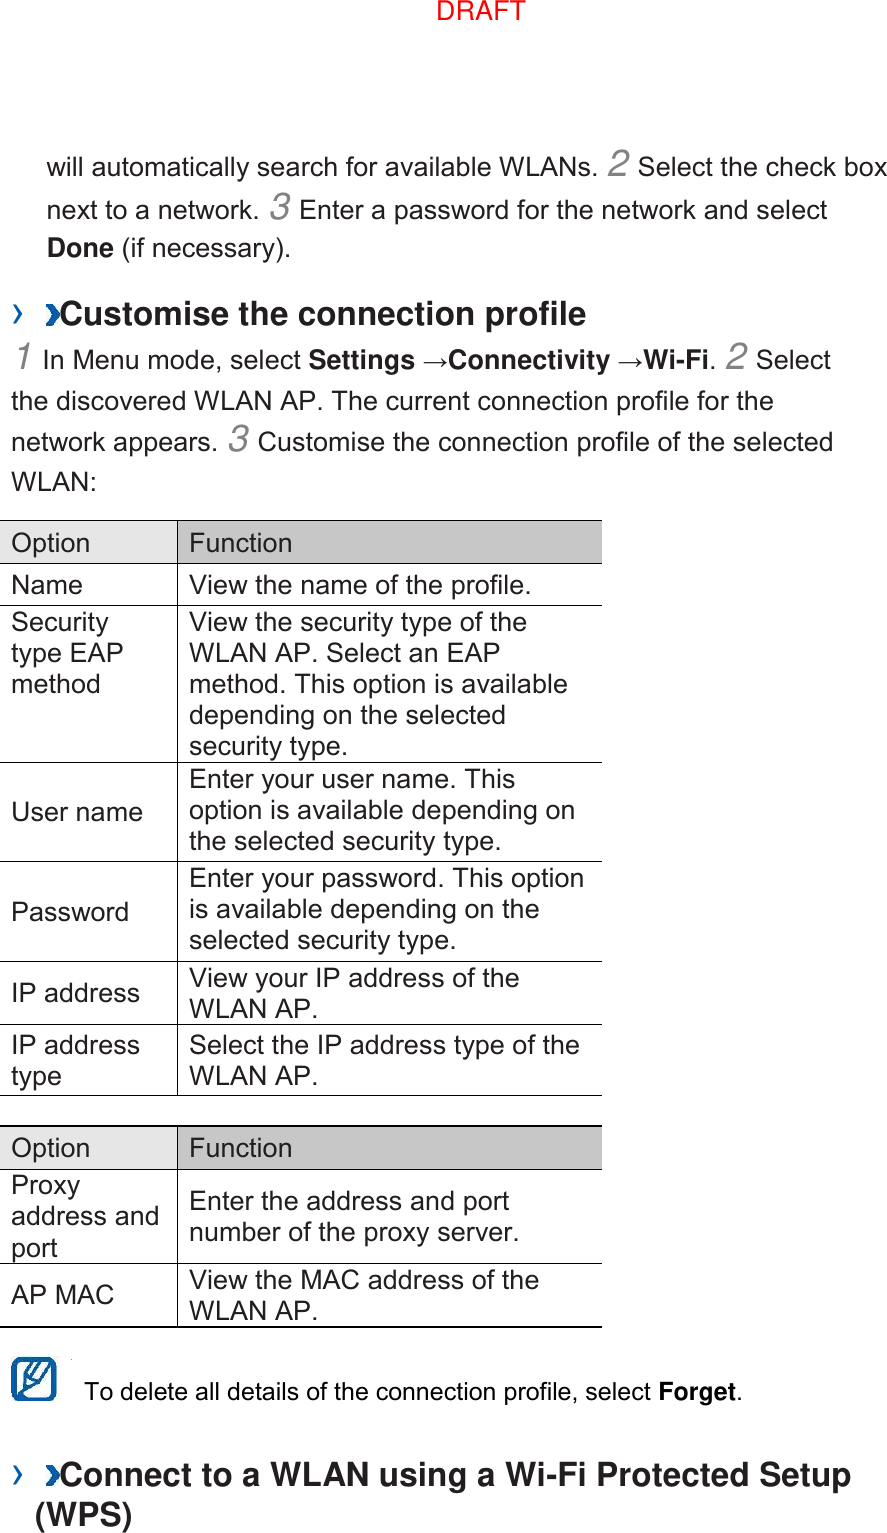 will automatically search for available WLANs. 2 Select the check box next to a network. 3 Enter a password for the network and select Done (if necessary).   ›  Customise the connection profile   1 In Menu mode, select Settings →Connectivity →Wi-Fi. 2 Select the discovered WLAN AP. The current connection profile for the network appears. 3 Customise the connection profile of the selected WLAN:   Option   Function   Name   View the name of the profile.   Security type EAP method   View the security type of the WLAN AP. Select an EAP method. This option is available depending on the selected security type.   User name   Enter your user name. This option is available depending on the selected security type.   Password   Enter your password. This option is available depending on the selected security type.   IP address   View your IP address of the WLAN AP.   IP address type   Select the IP address type of the WLAN AP.    Option   Function   Proxy address and port   Enter the address and port number of the proxy server.   AP MAC   View the MAC address of the WLAN AP.      To delete all details of the connection profile, select Forget.   ›  Connect to a WLAN using a Wi-Fi Protected Setup (WPS)   DRAFT